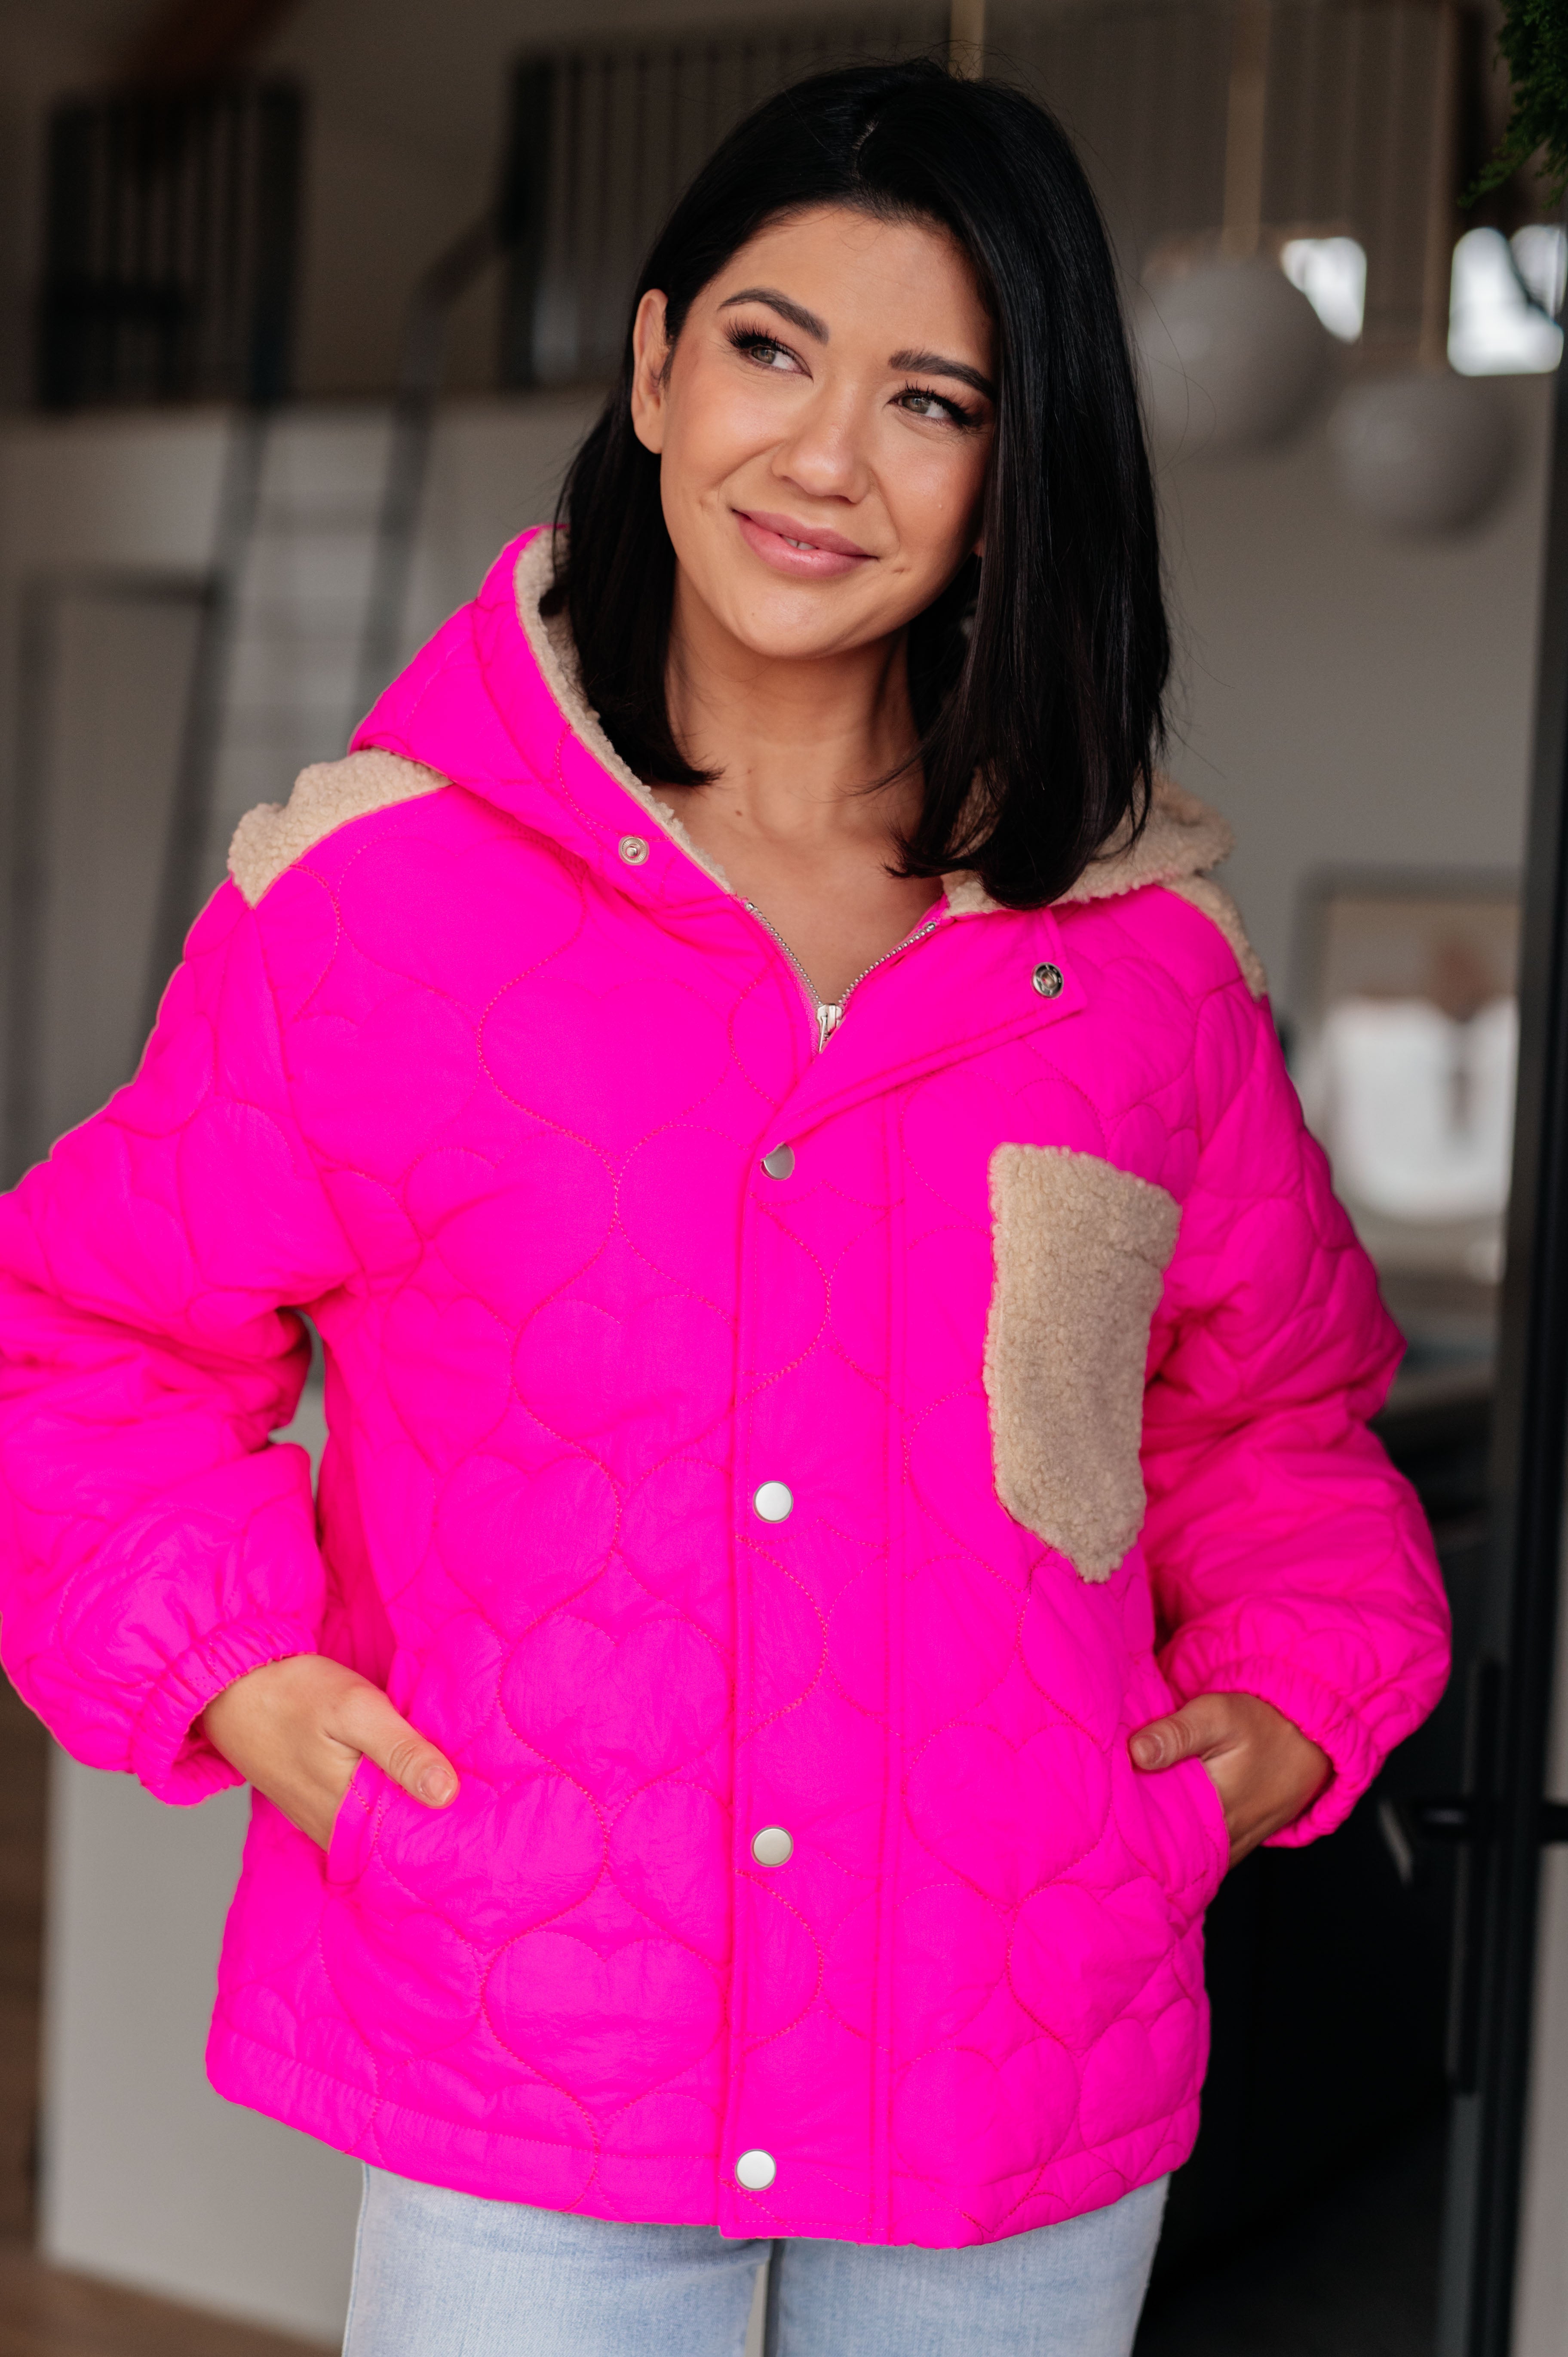 White Birch Not Sure How Hot Pink Puffer Jacket Ave Shops